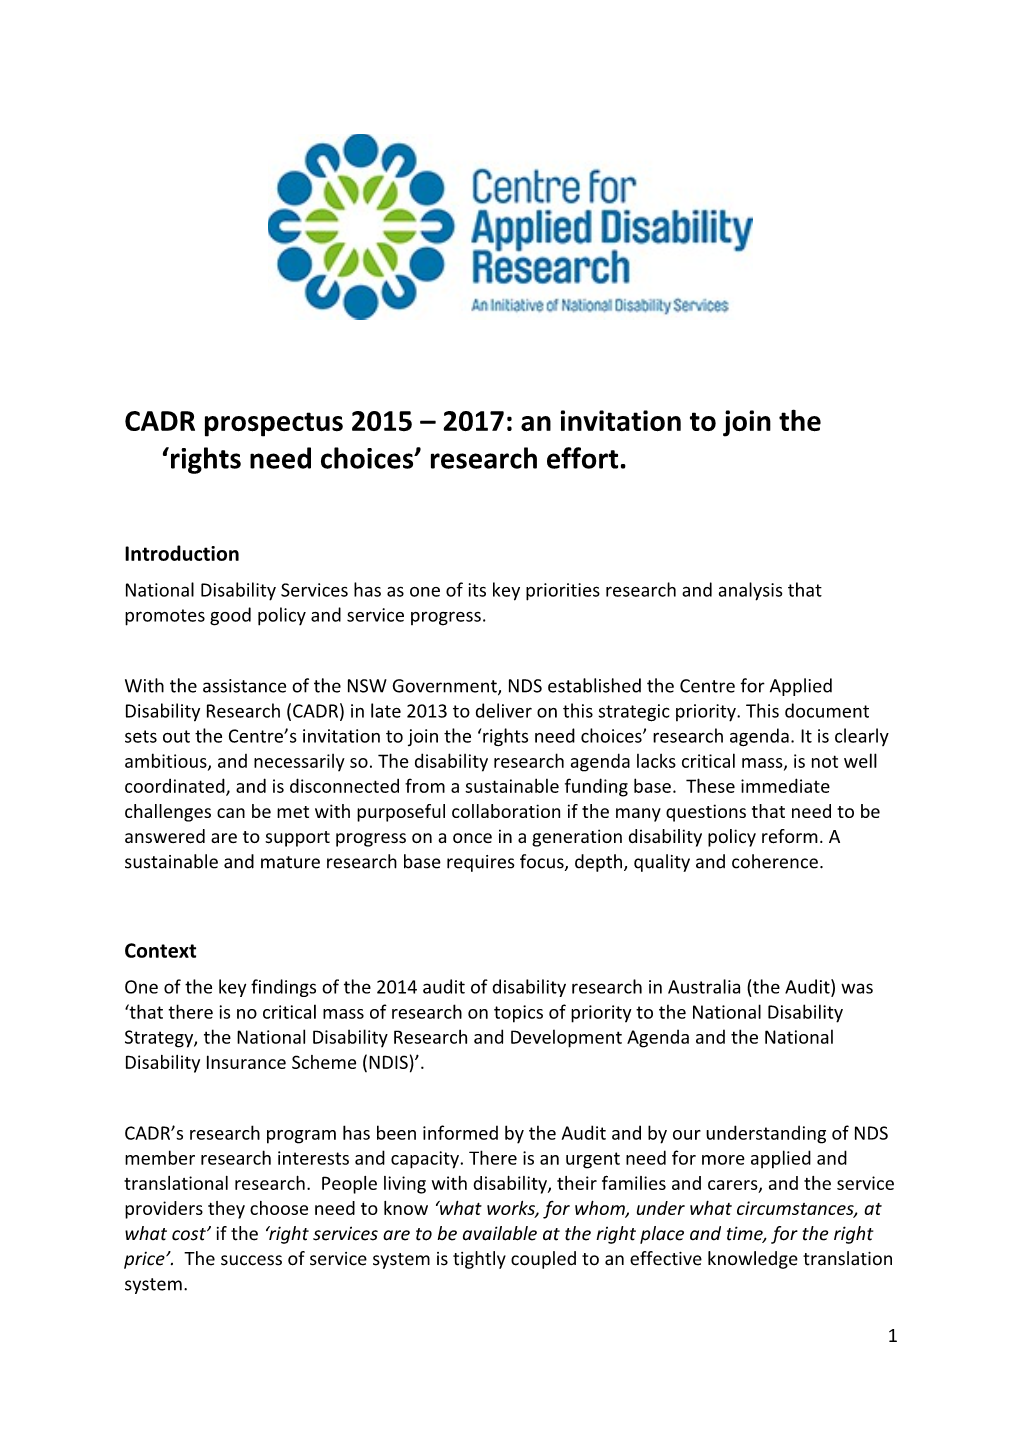 CADR Prospectus 2015 2017: an Invitation to Join the Rights Need Choices Research Effort